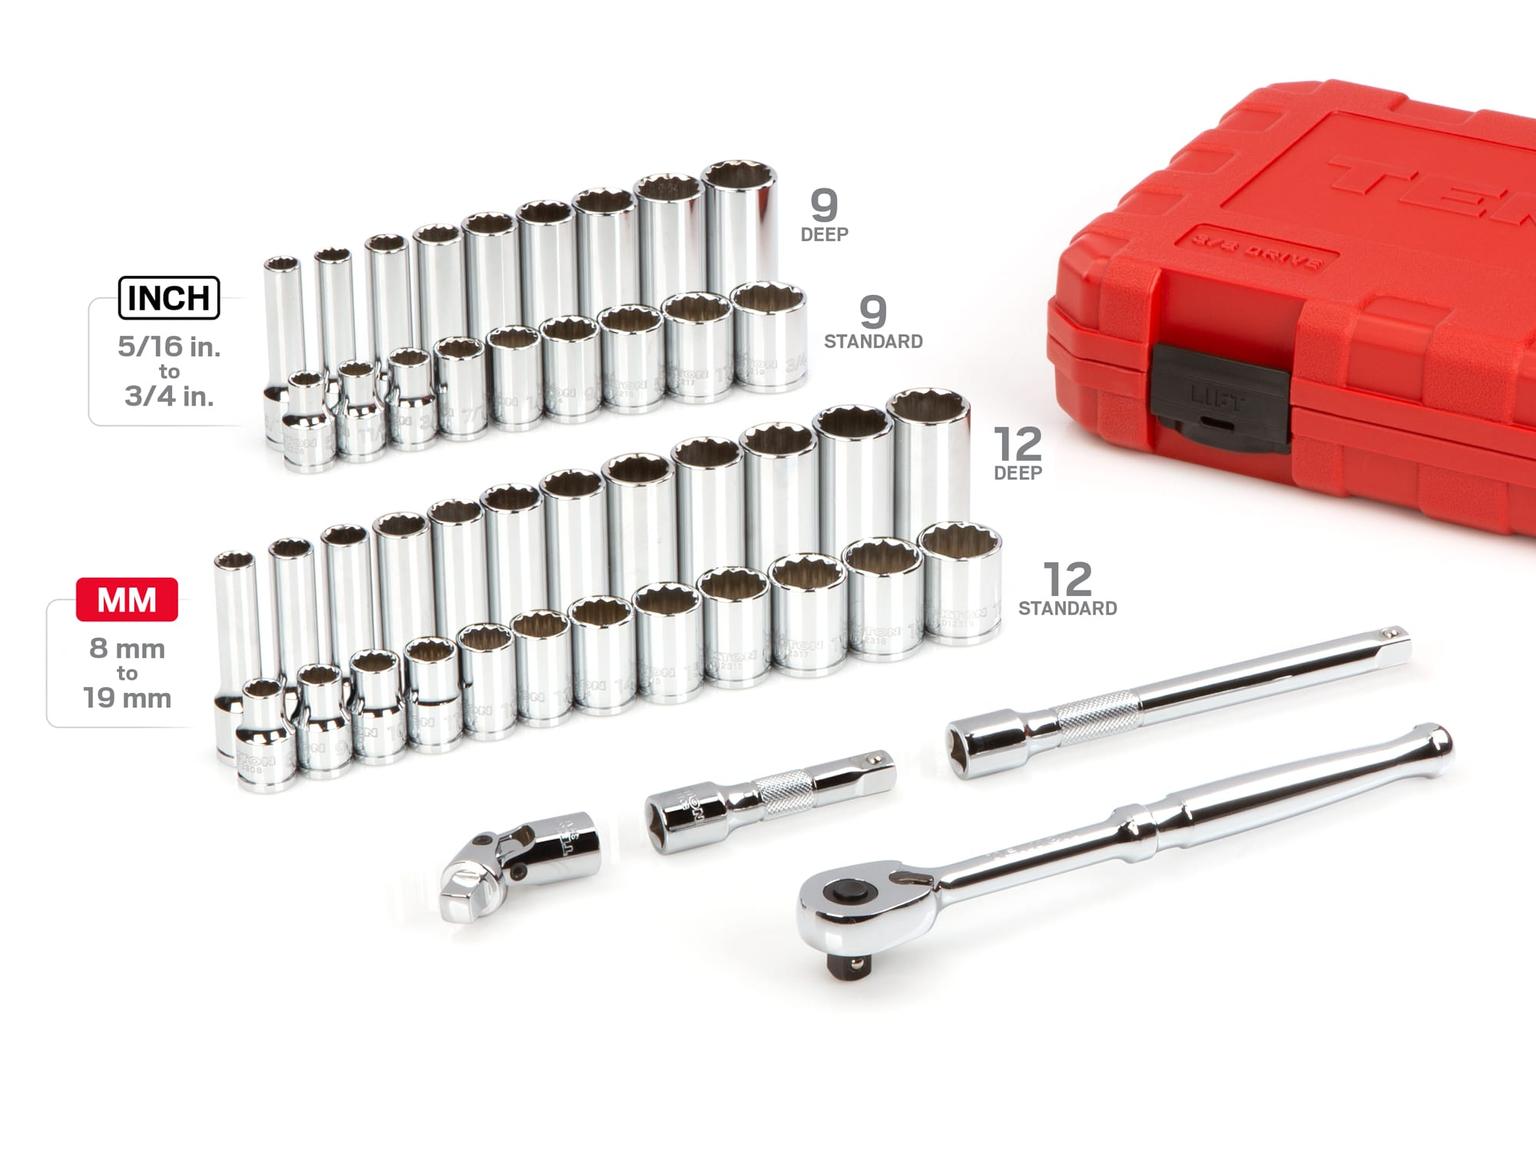 TEKTON SKT15302-D 3/8 Inch Drive 12-Point Socket and Ratchet Set, 46-Piece (5/16-3/4 in., 8-19 mm)